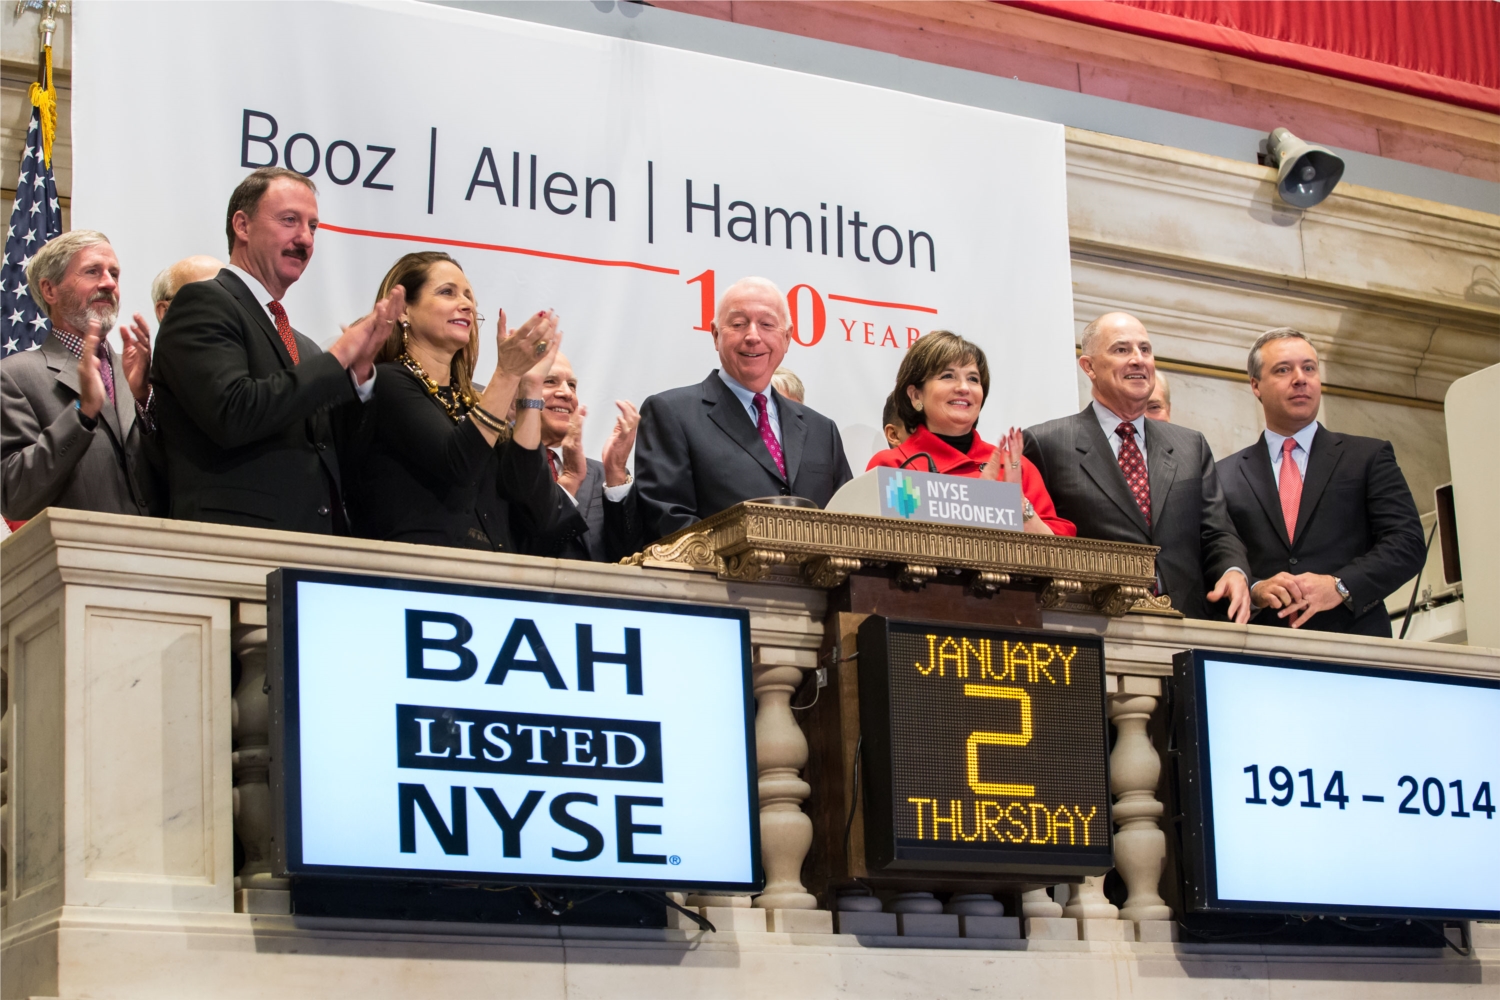 Booz Allen Hamilton (NYSE:BAH) leaders, past and present, celebrated the launch of the firm’s 100th anniversary year by ringing The Opening Bell® on January 2, 2014 at the New York Stock Exchange.